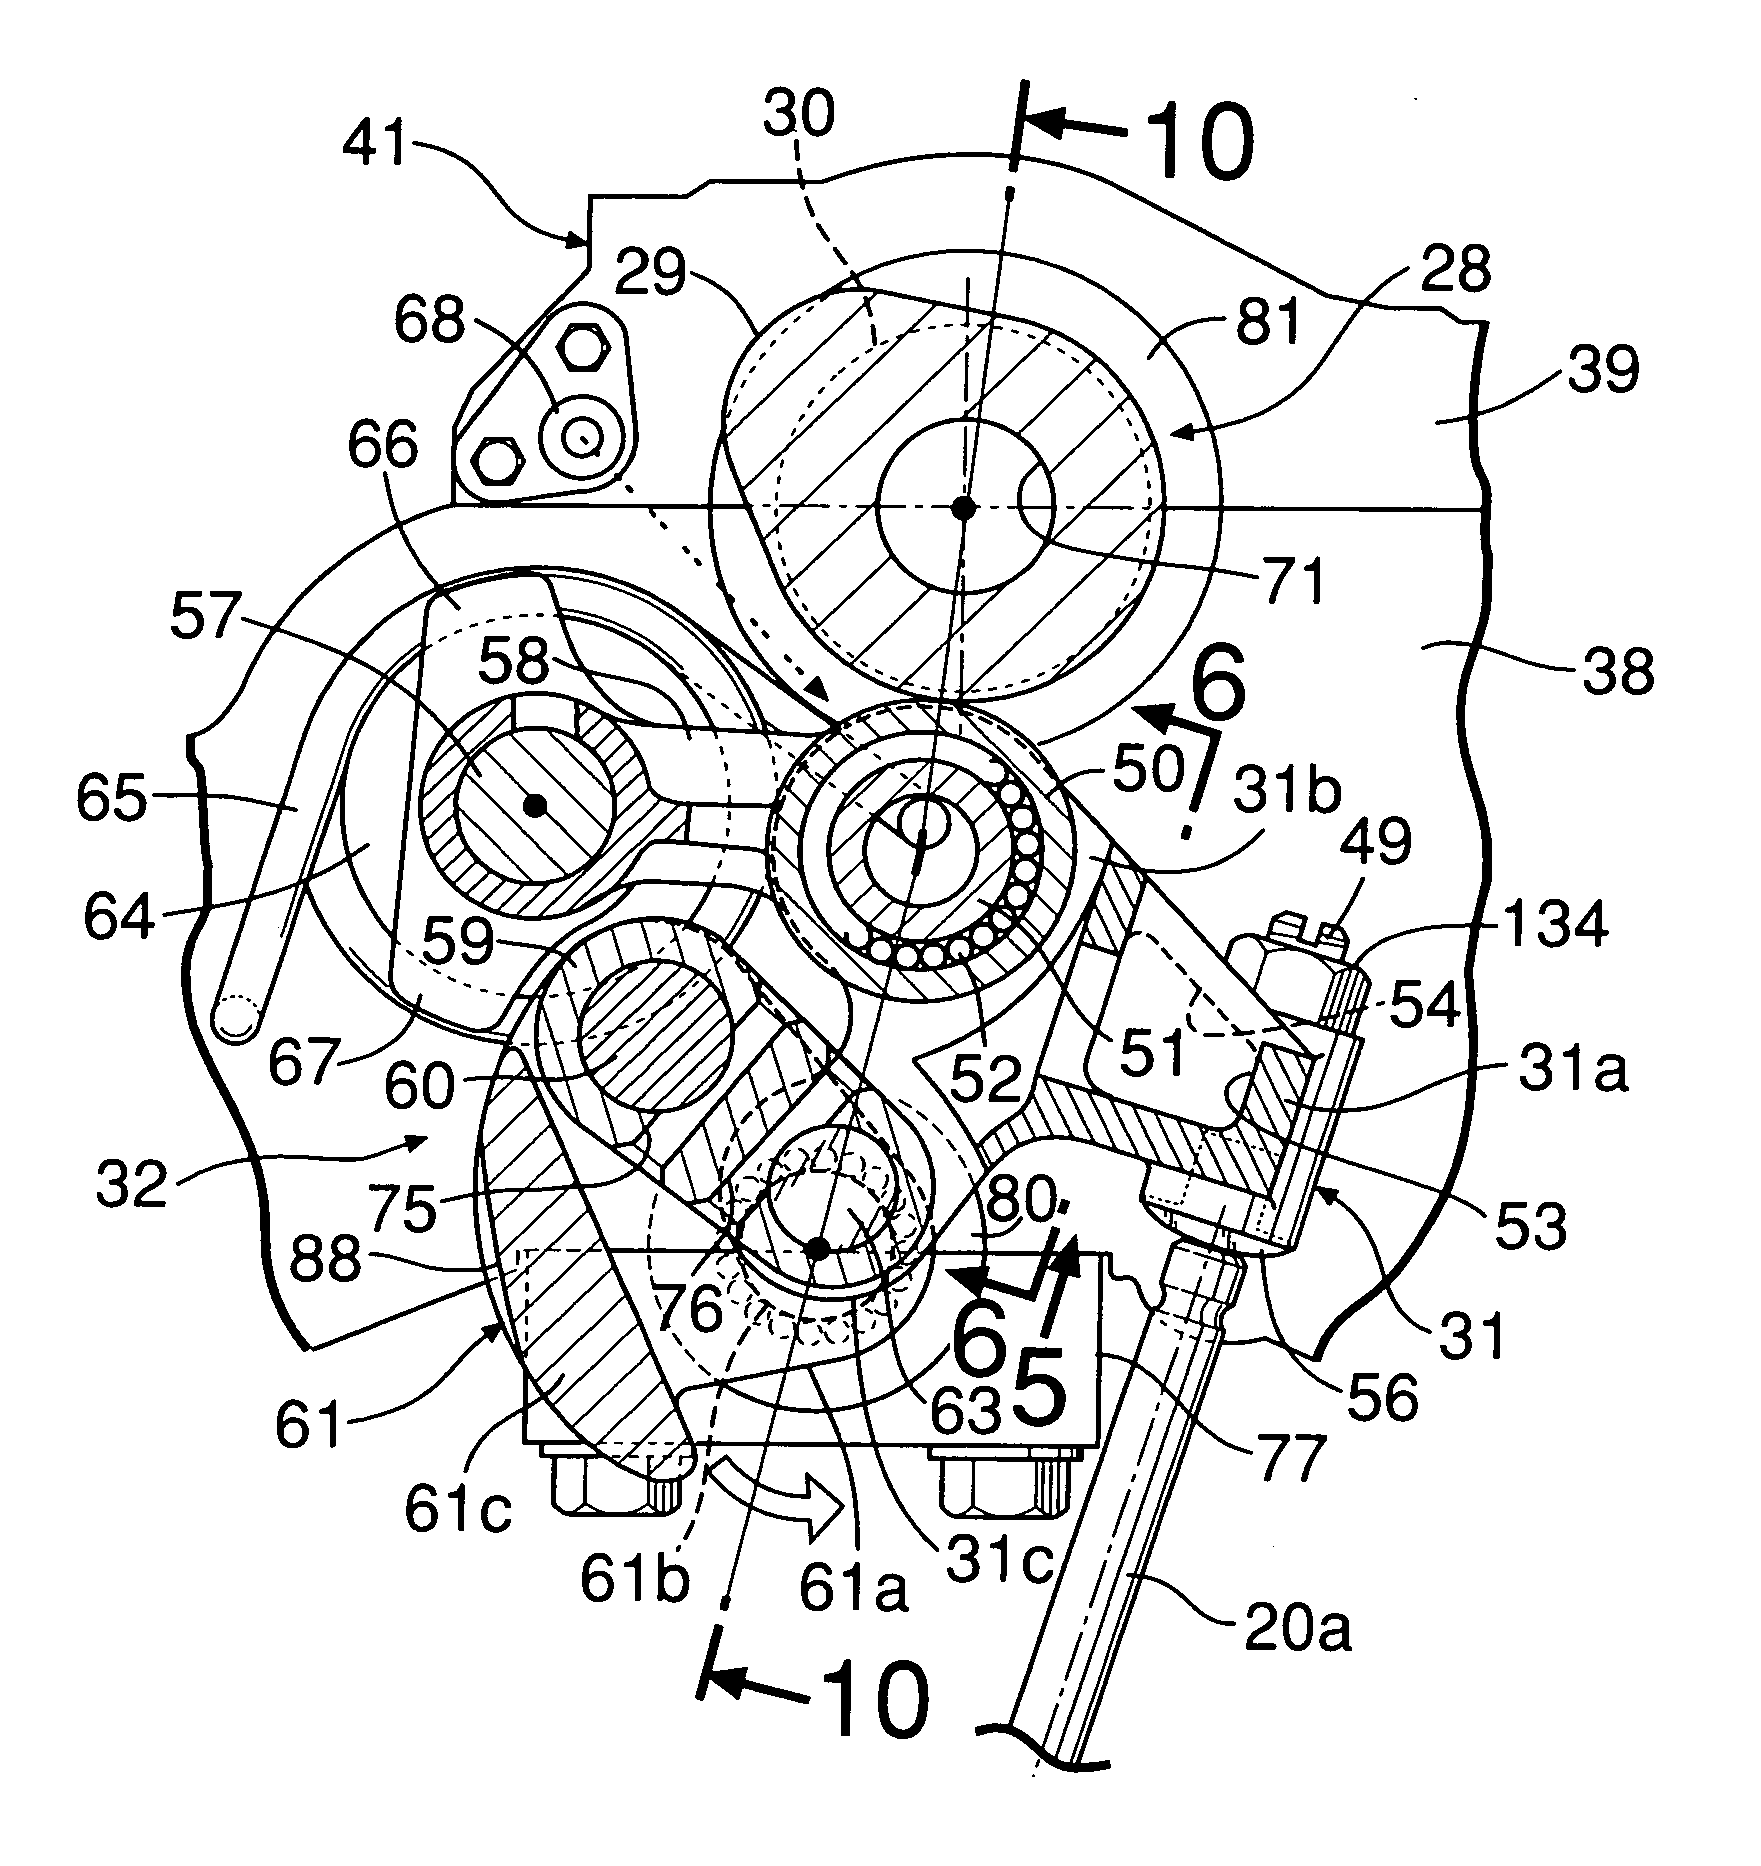 Drive of variable valve lift mechanism